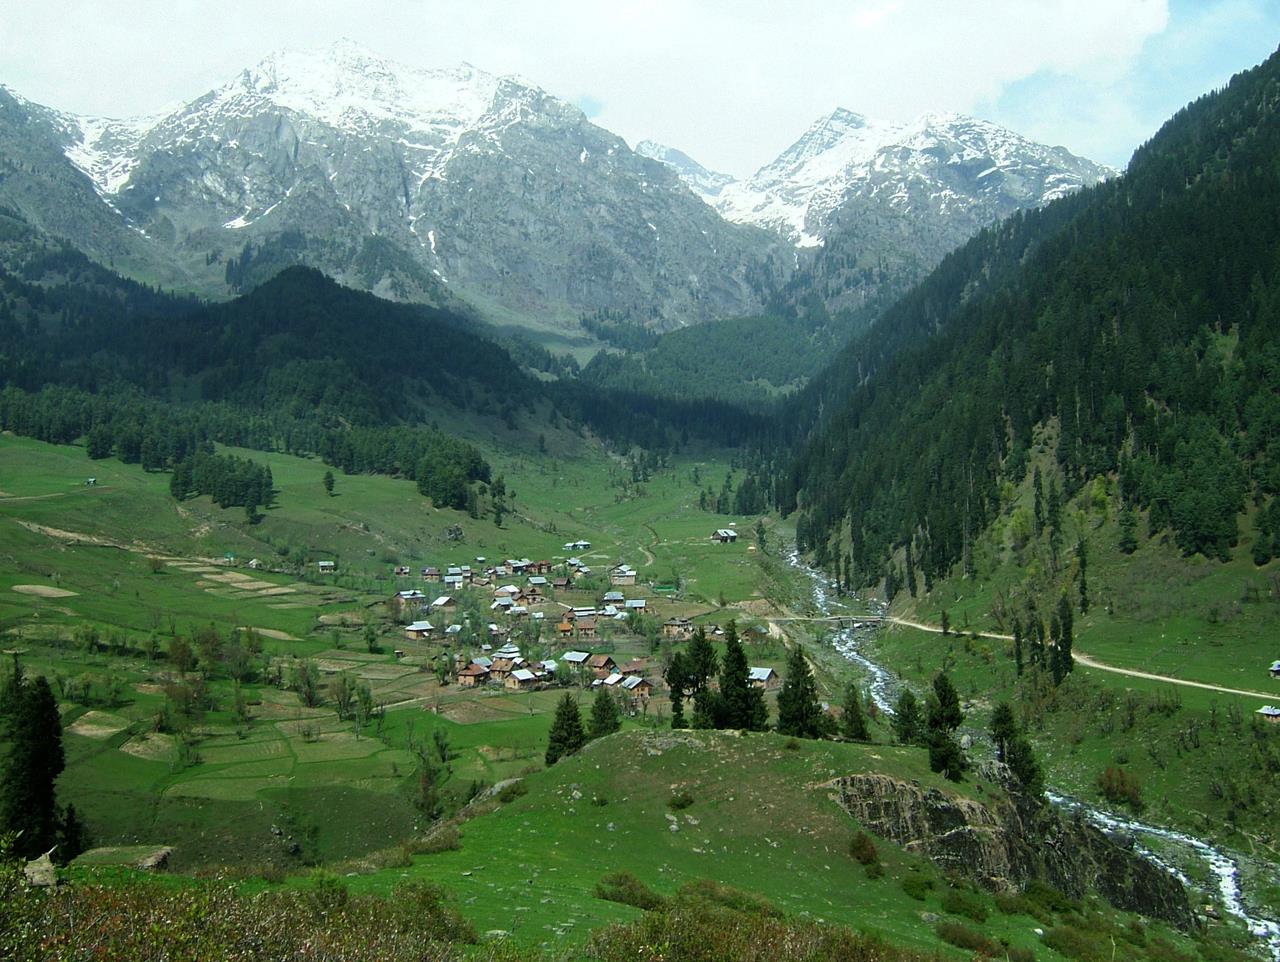 Tour Guide To Kashmir Valley India - XciteFun.net